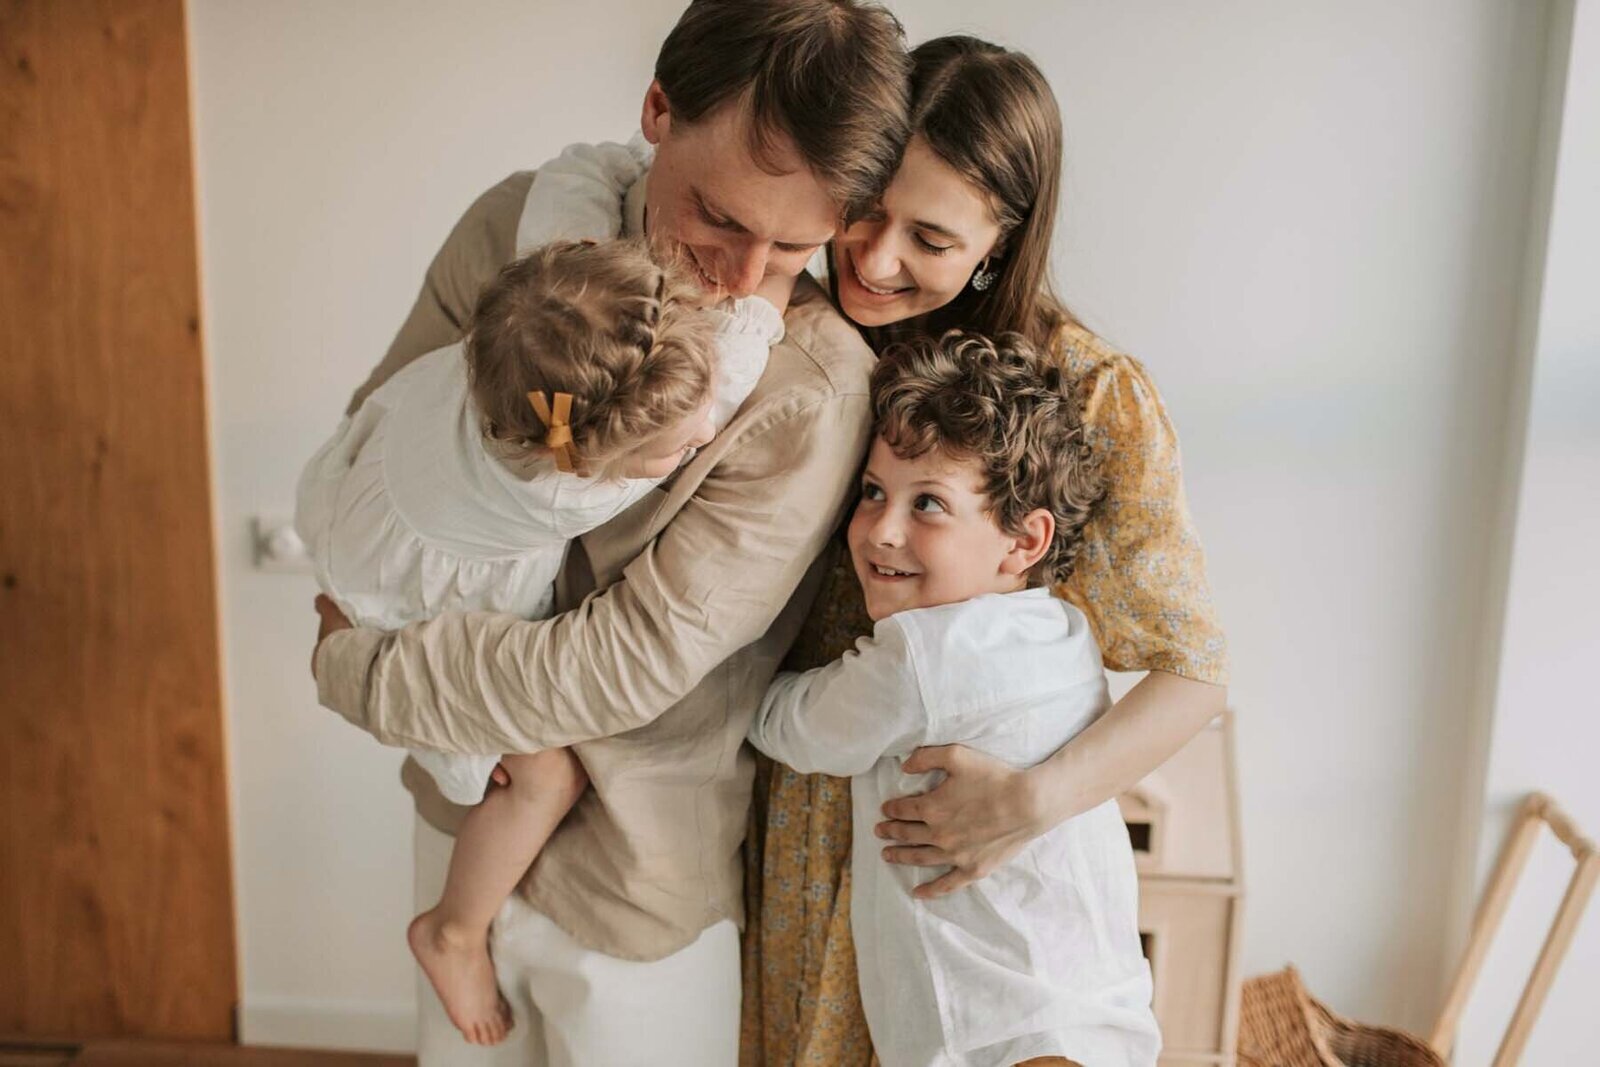 Mom, dad, and kids share a joyful moment, embodying the harmonious family life fostered by peaceful parenting principles